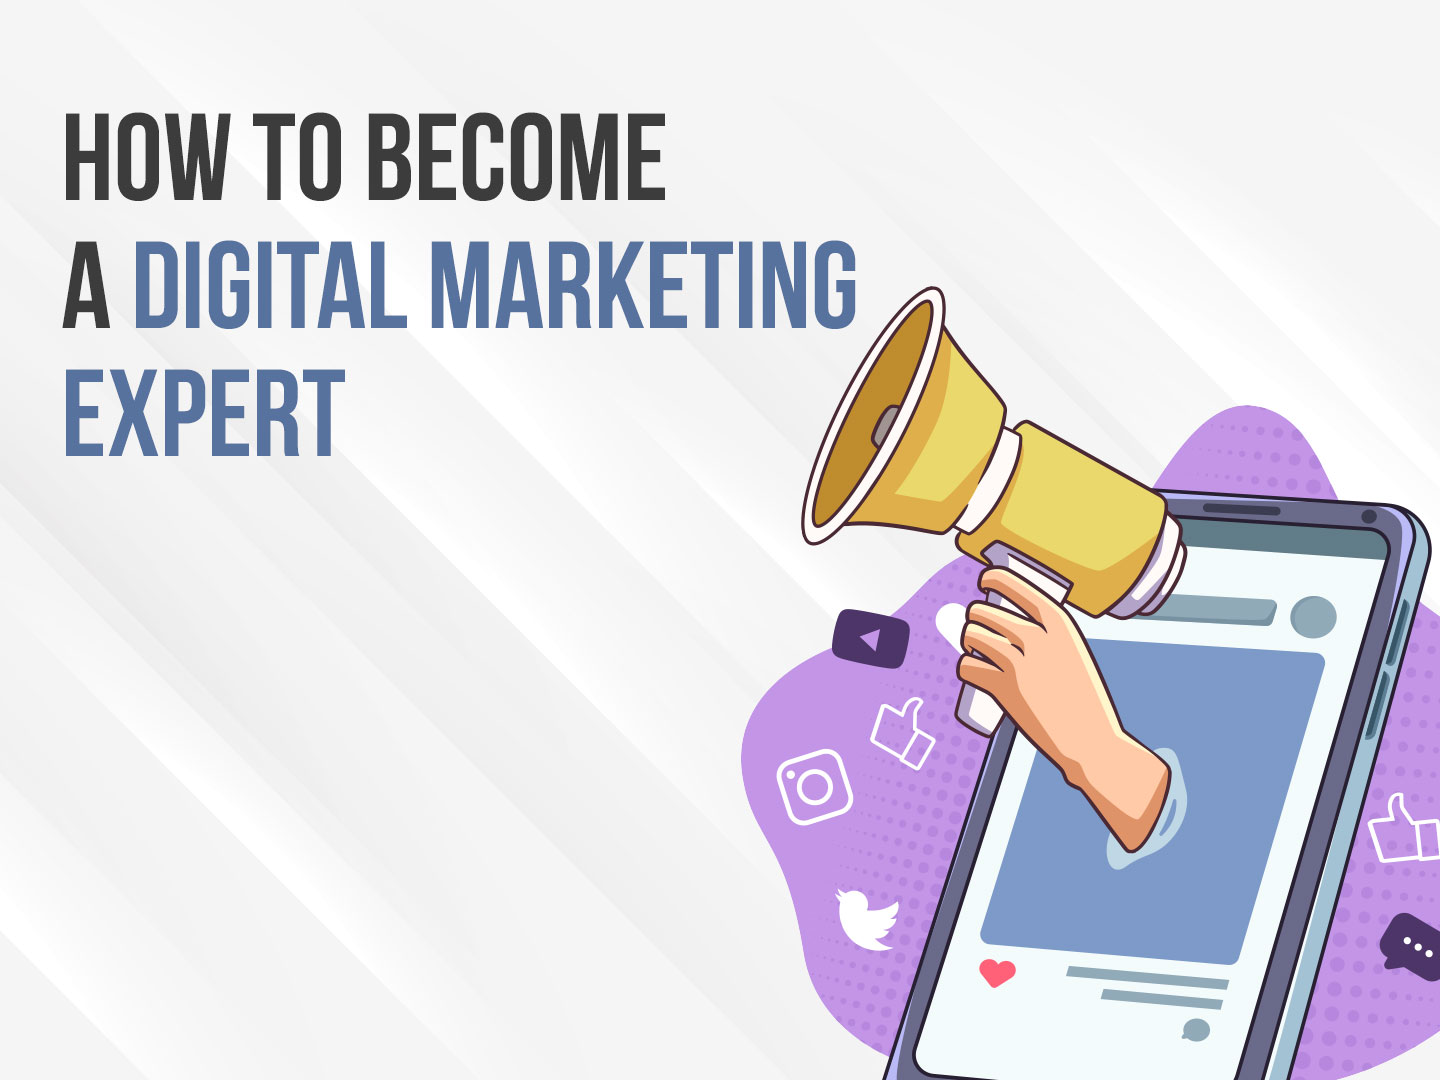 Different ways to become a Digital Marketing Expert